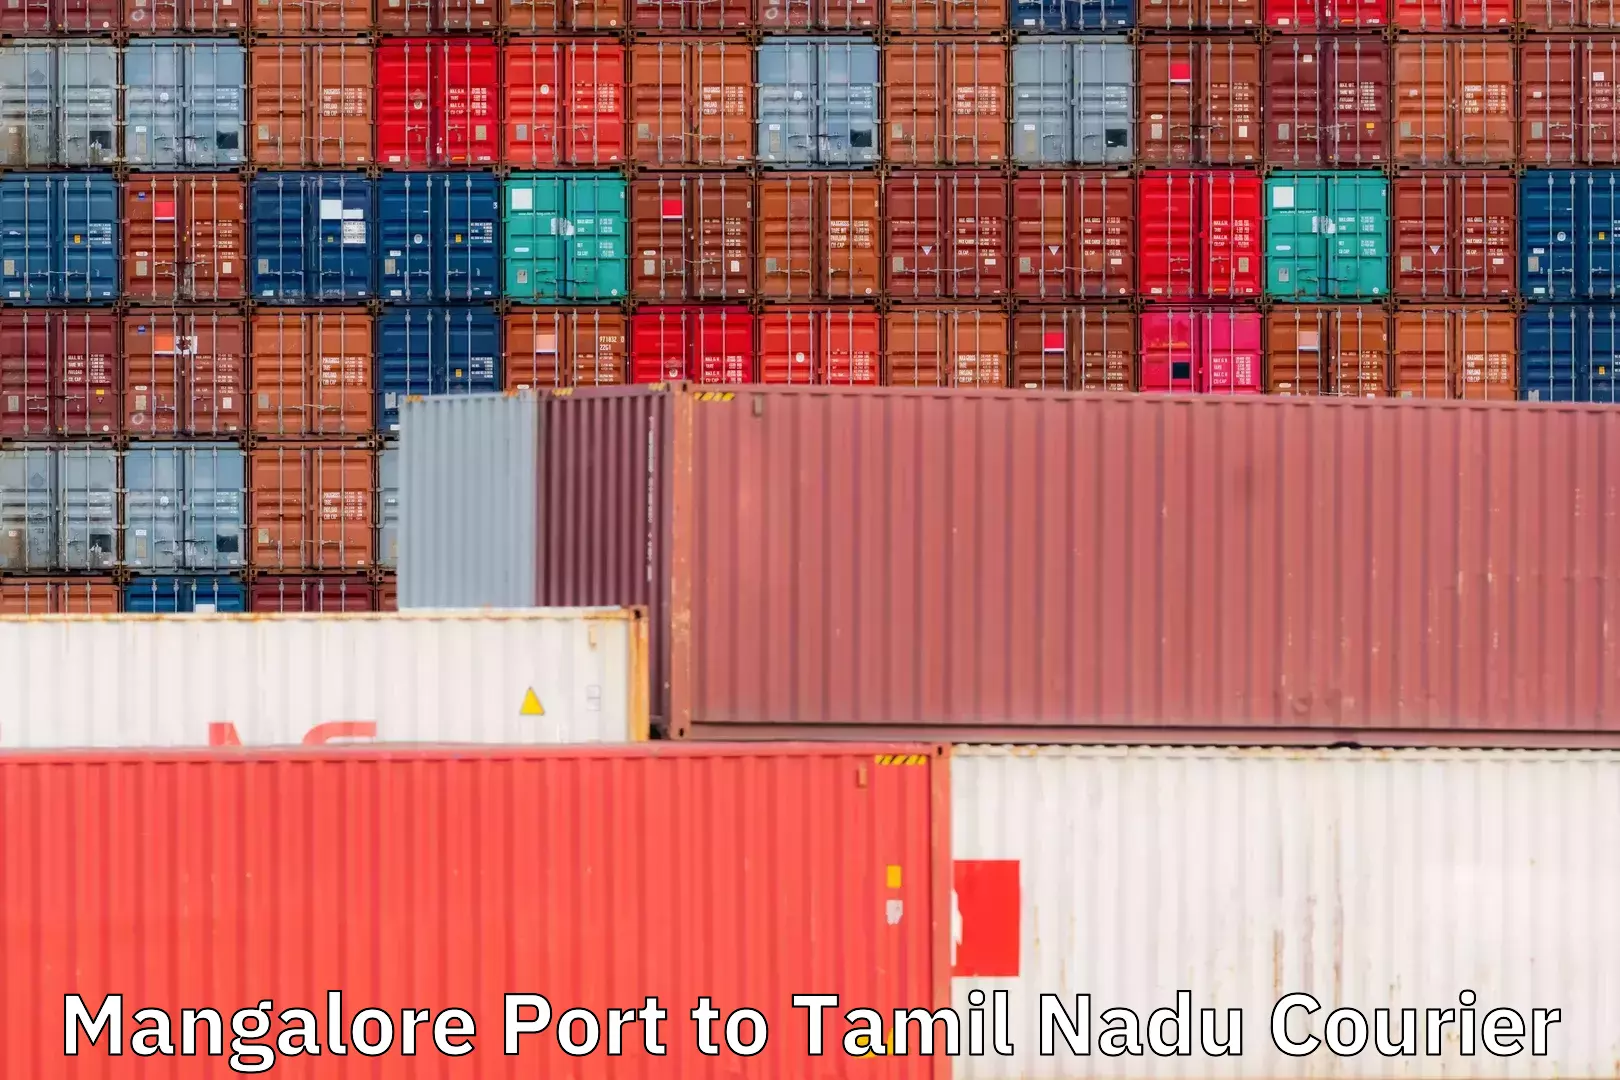 Budget-friendly shipping in Mangalore Port to Tamil Nadu